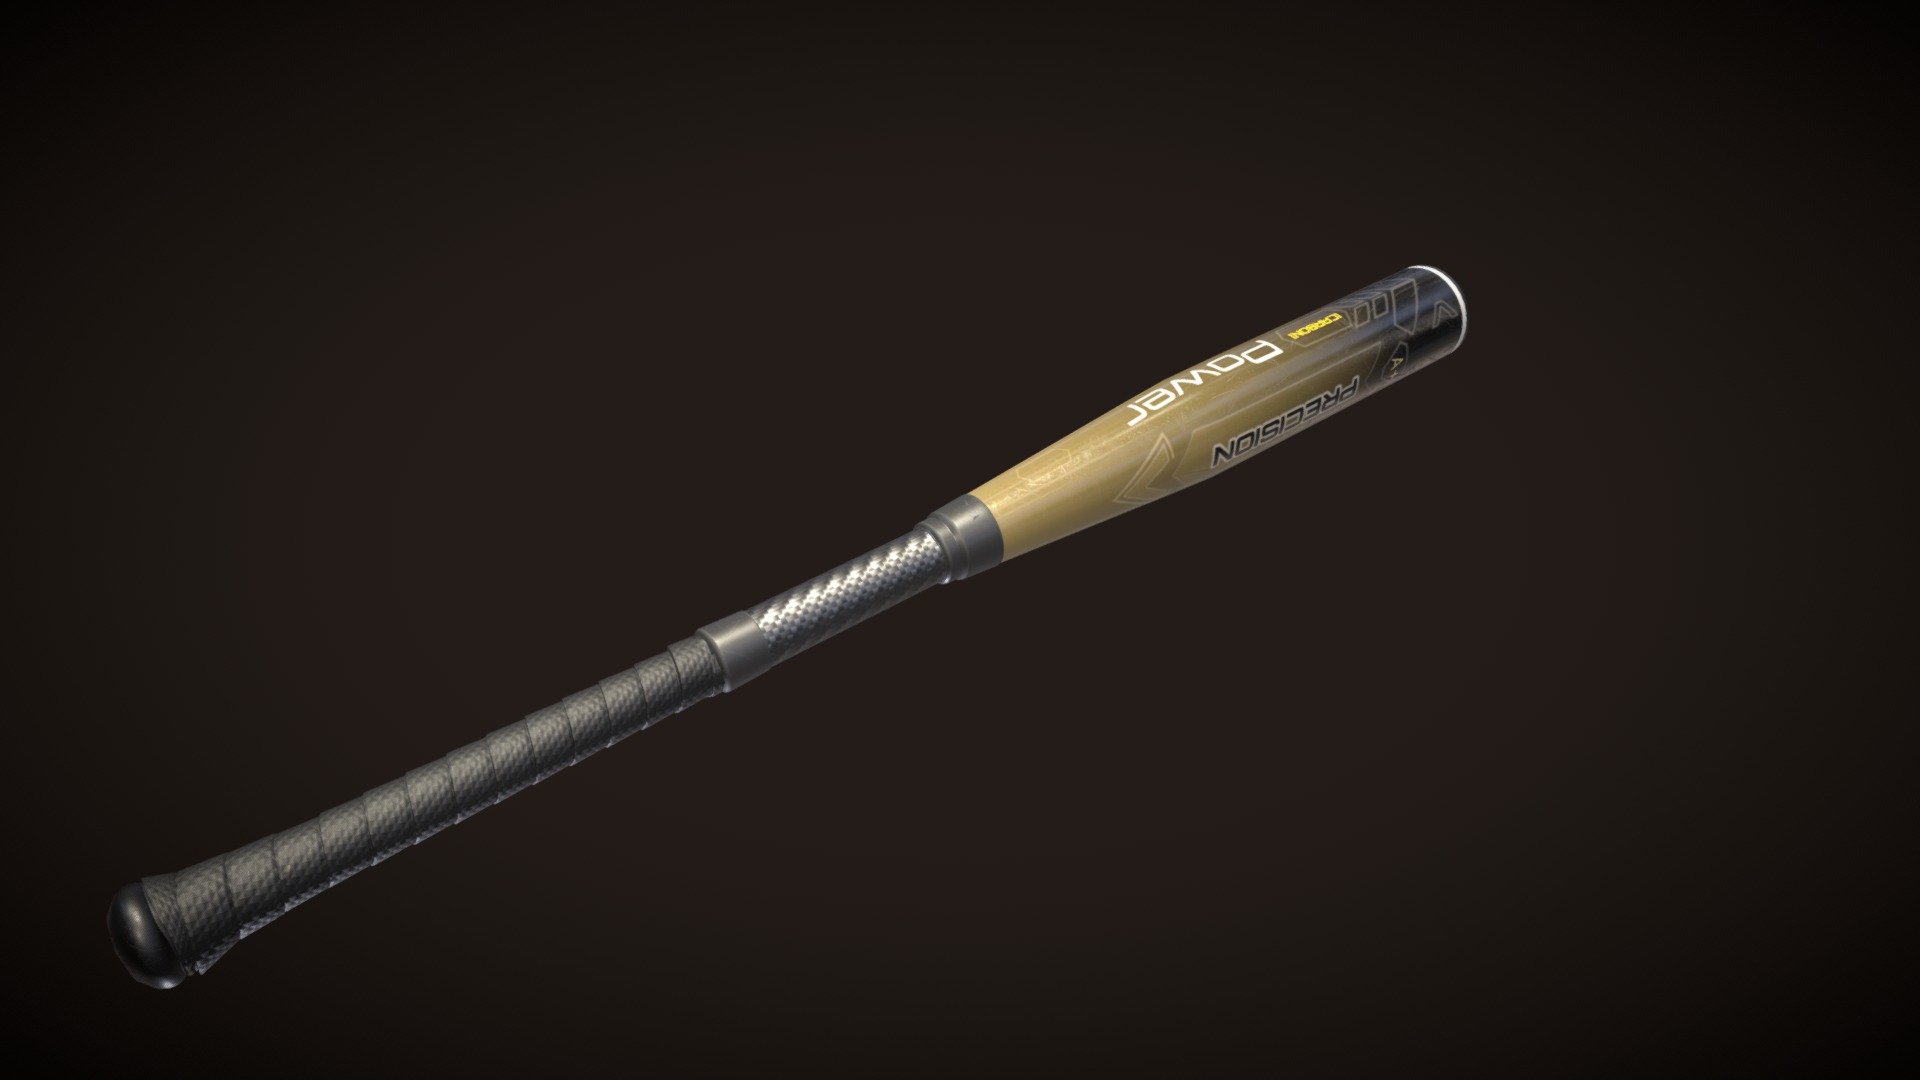 This is an alluminum or carbon fiber bat. While eye catching logos 3d model